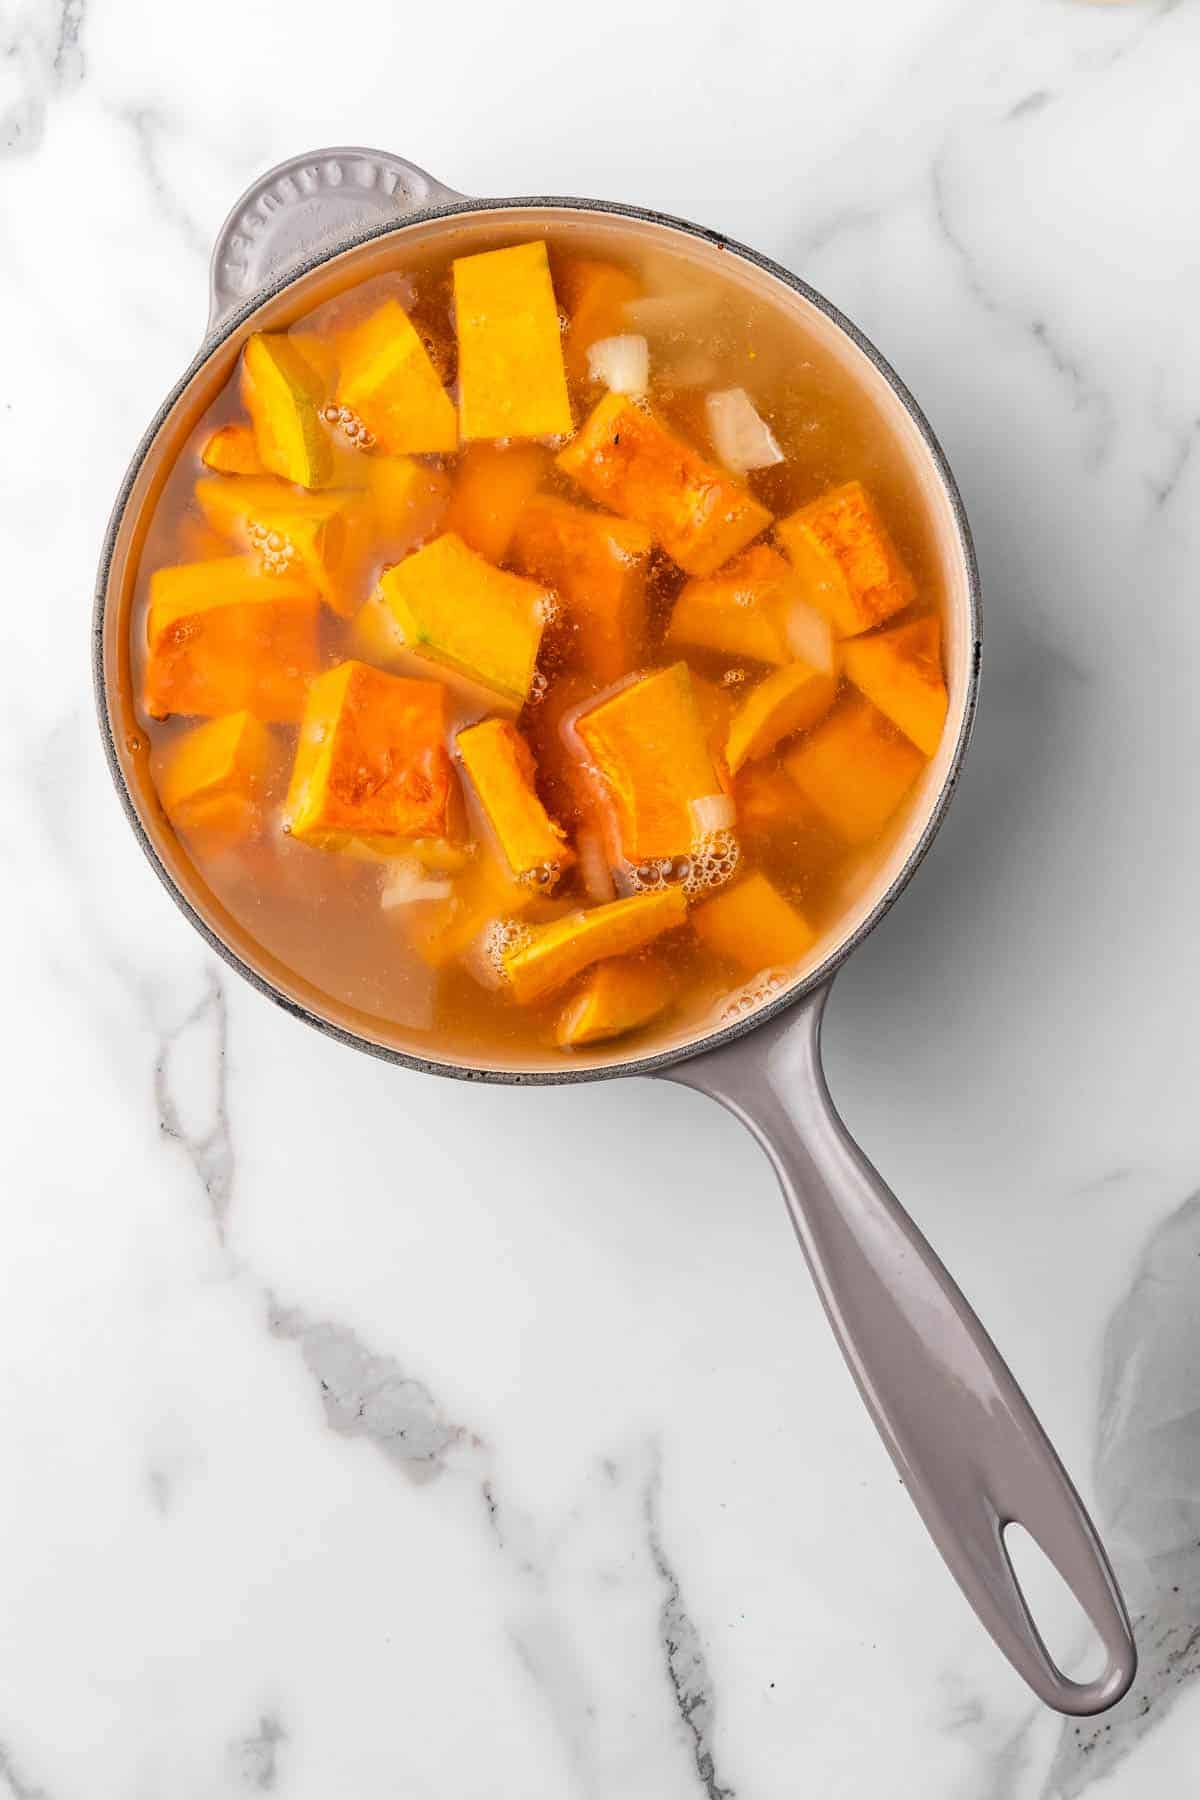 Buttercup squash and stock cooking in a pot